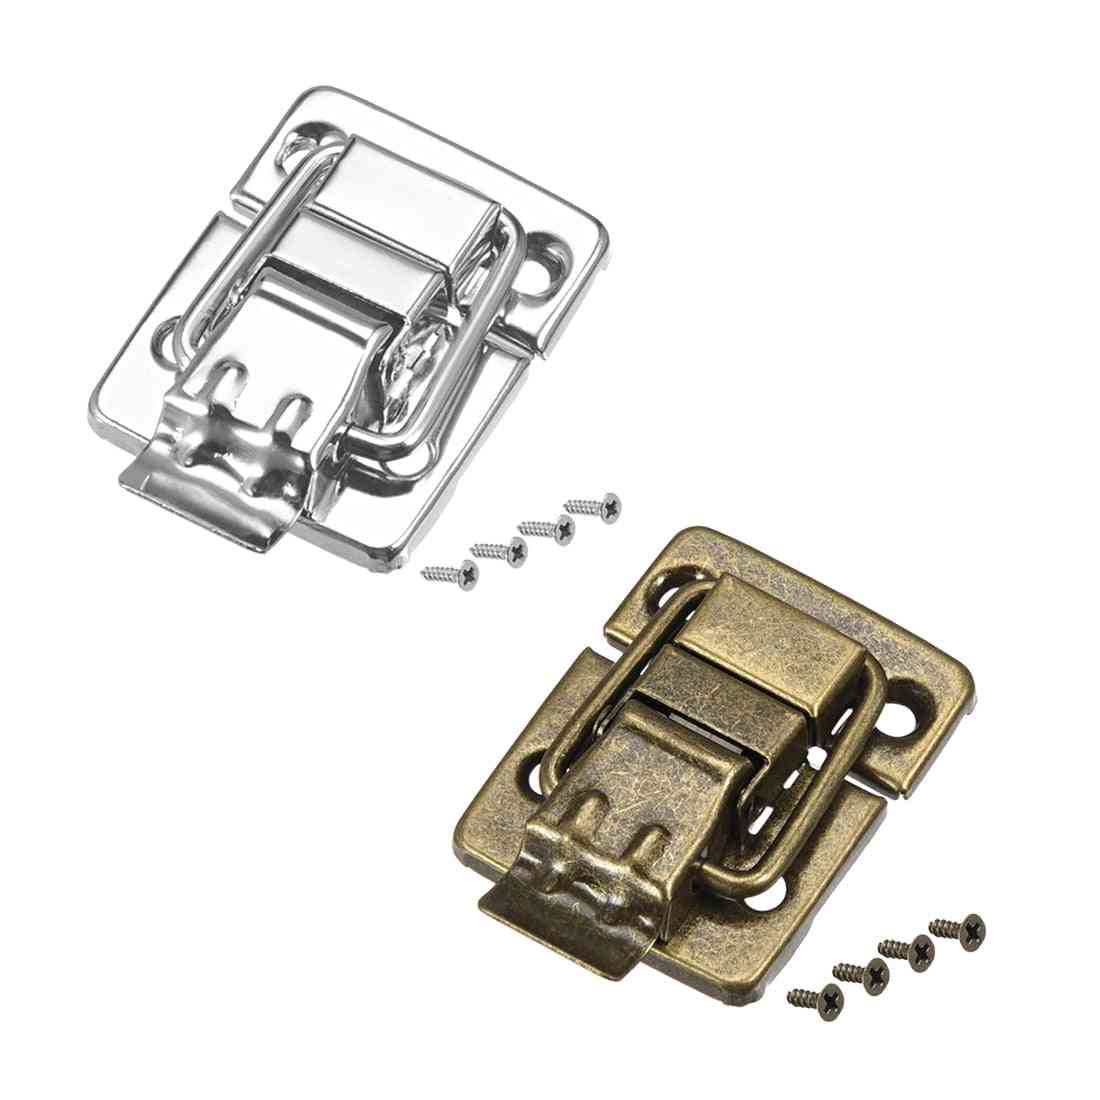 Small Size Suitcase Hasp Metal Catch Latch With Screws Durable